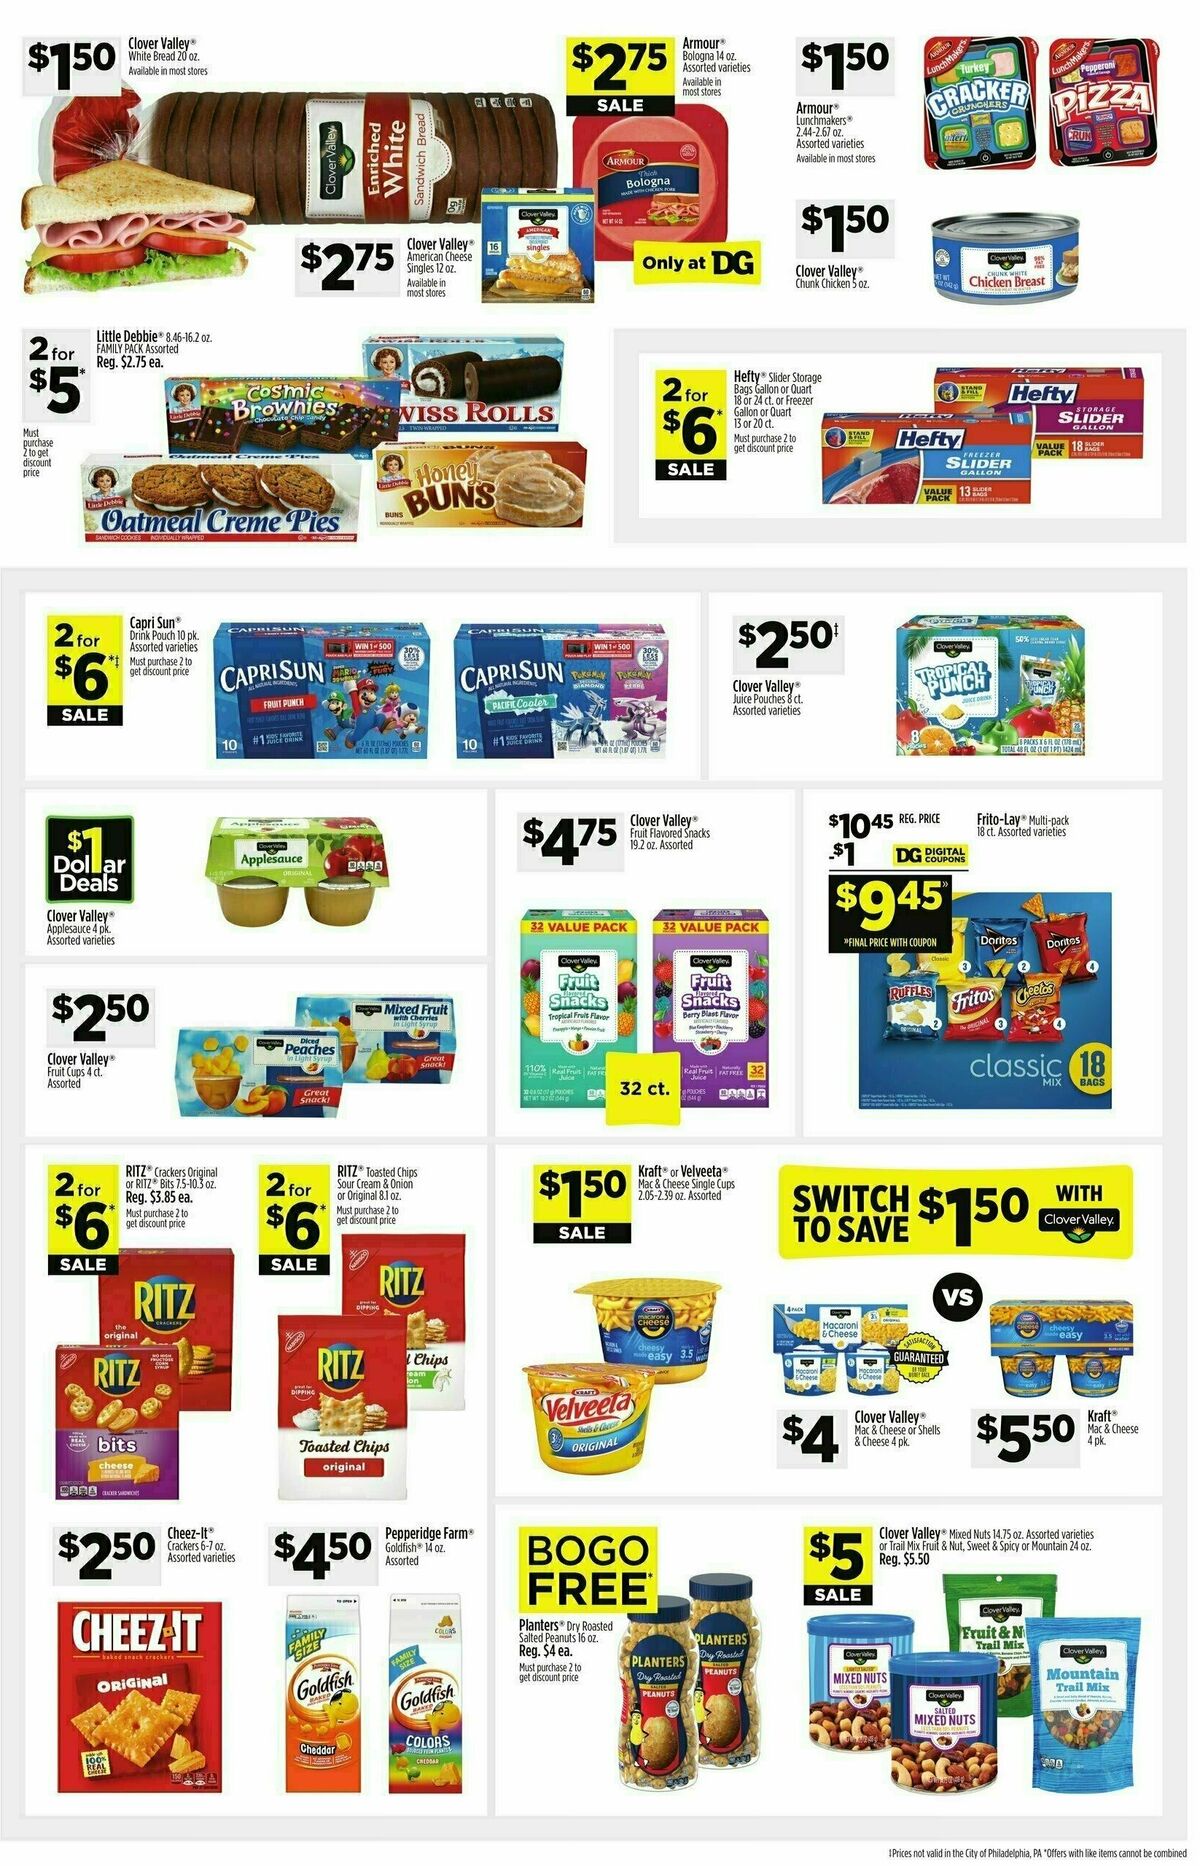 Dollar General Weekly Ad from September 5